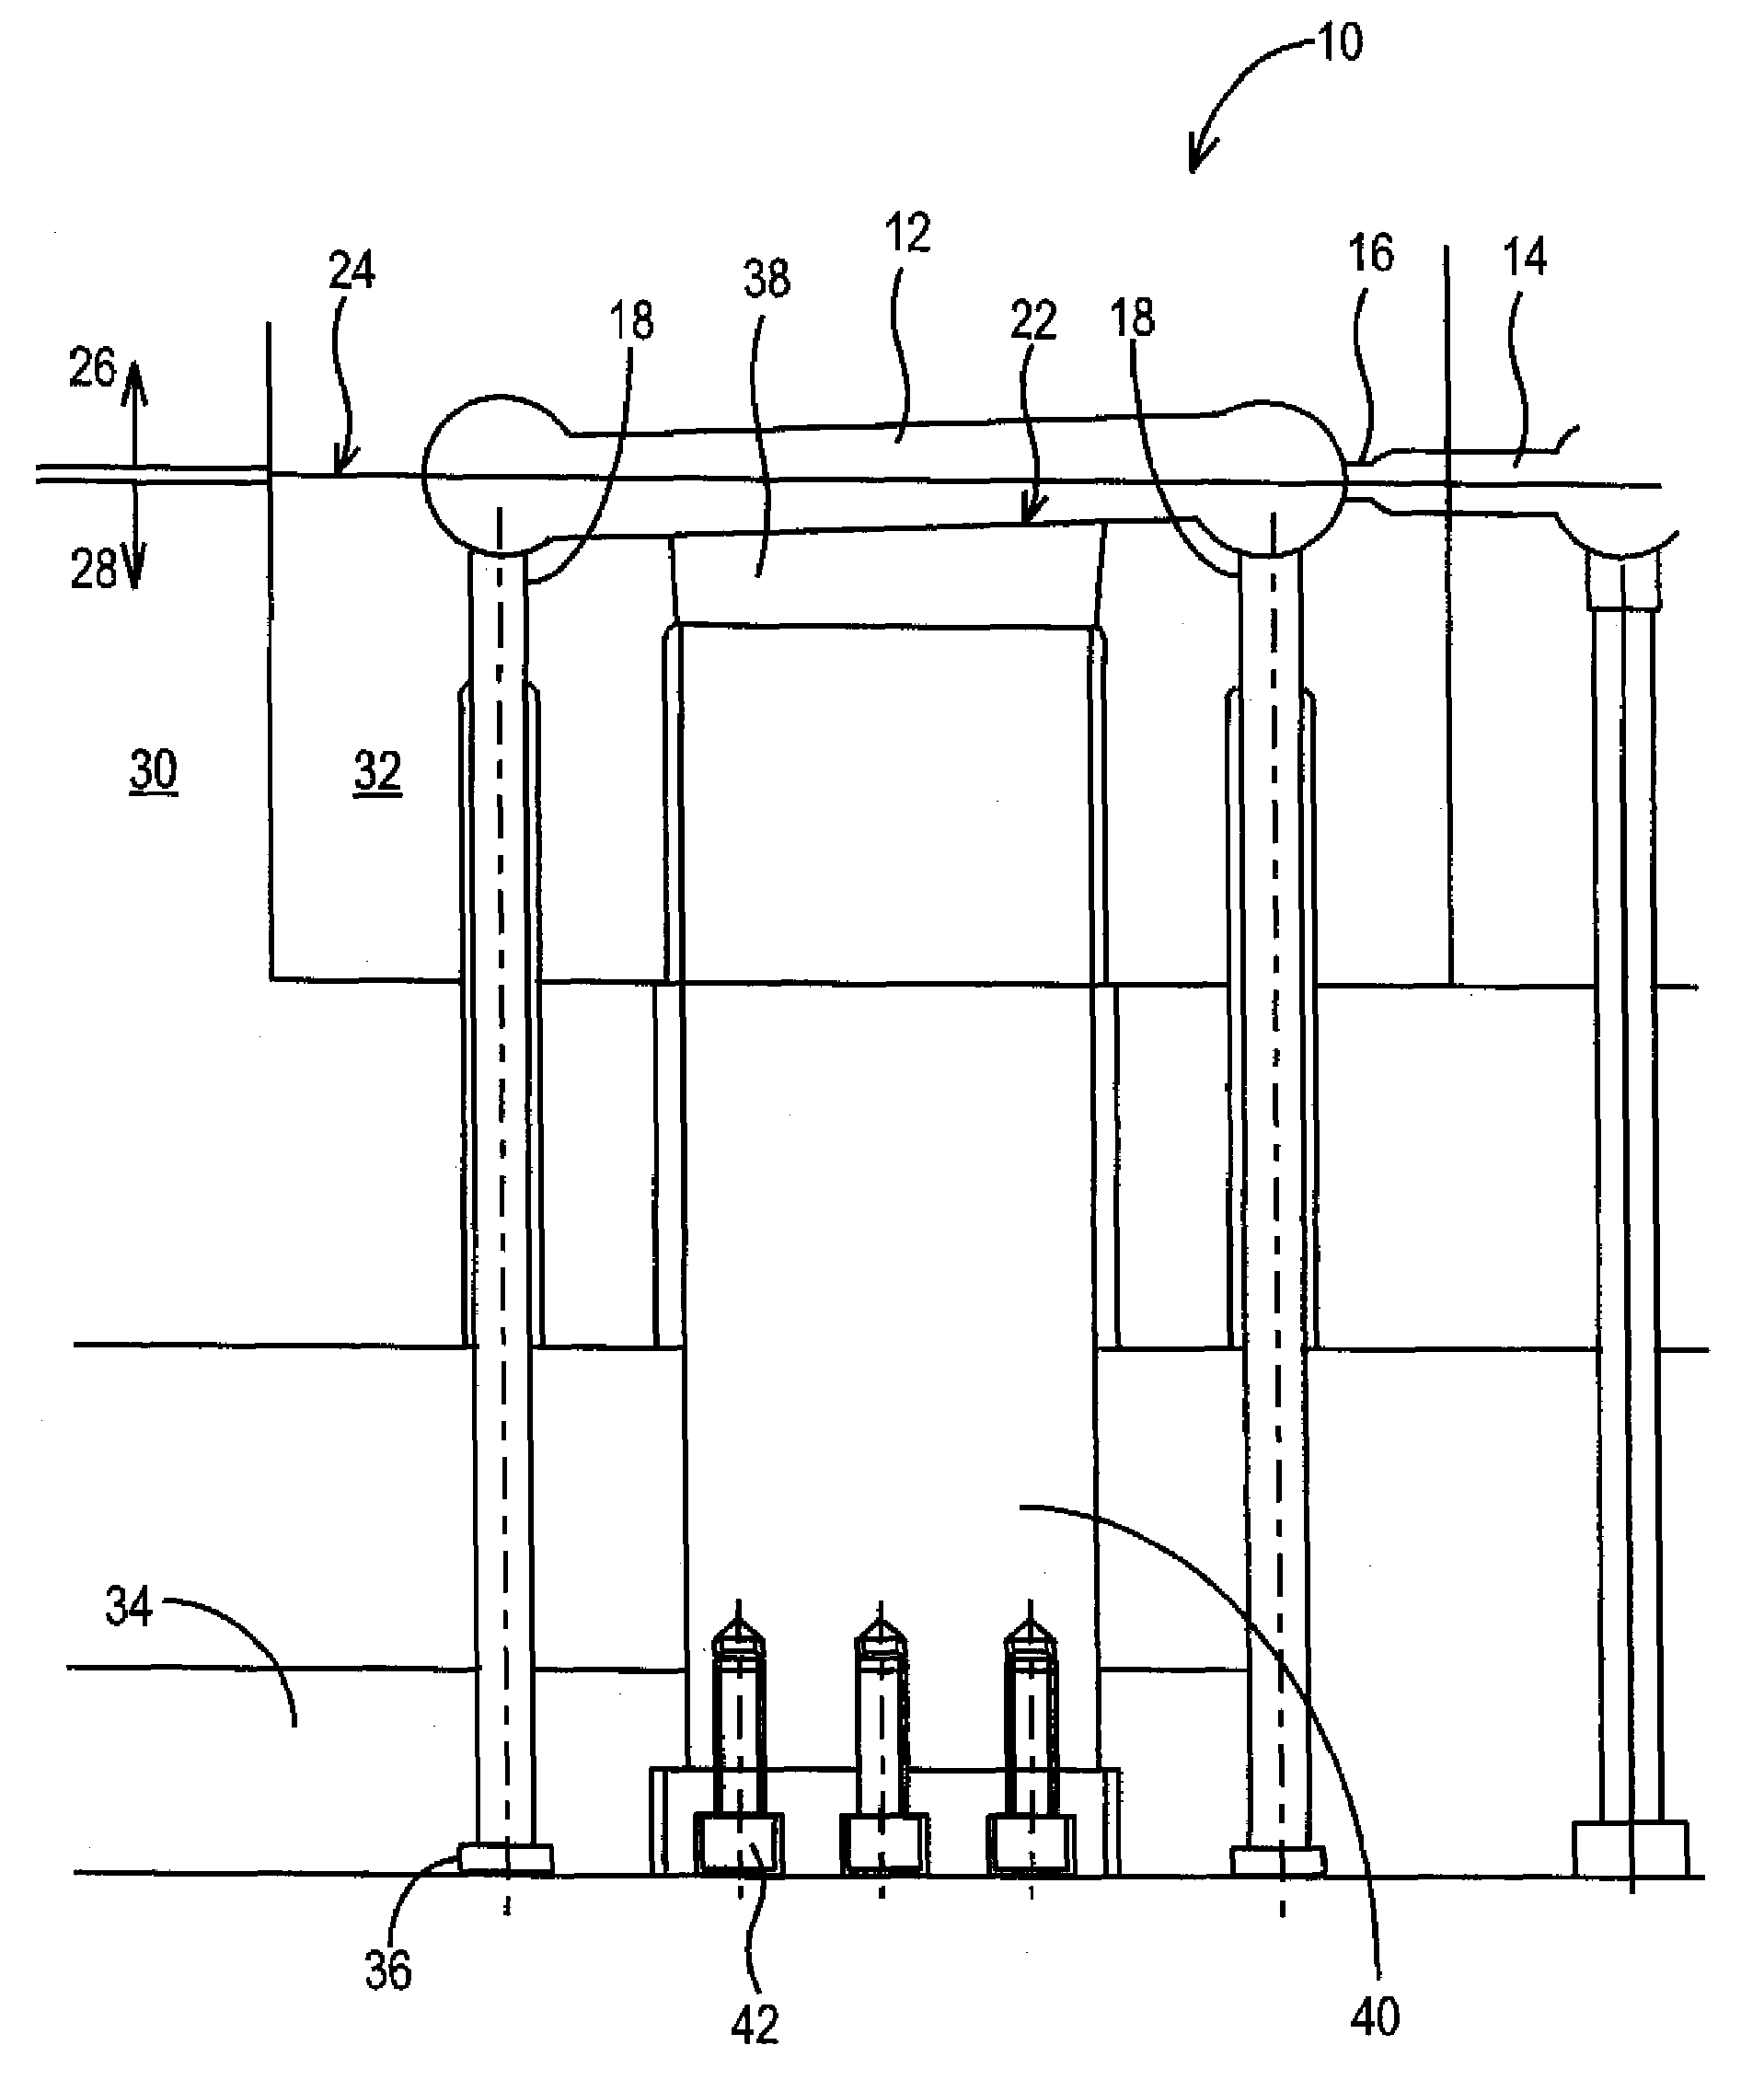 Method of removing molded natural resins from molds utilizing lifter bars